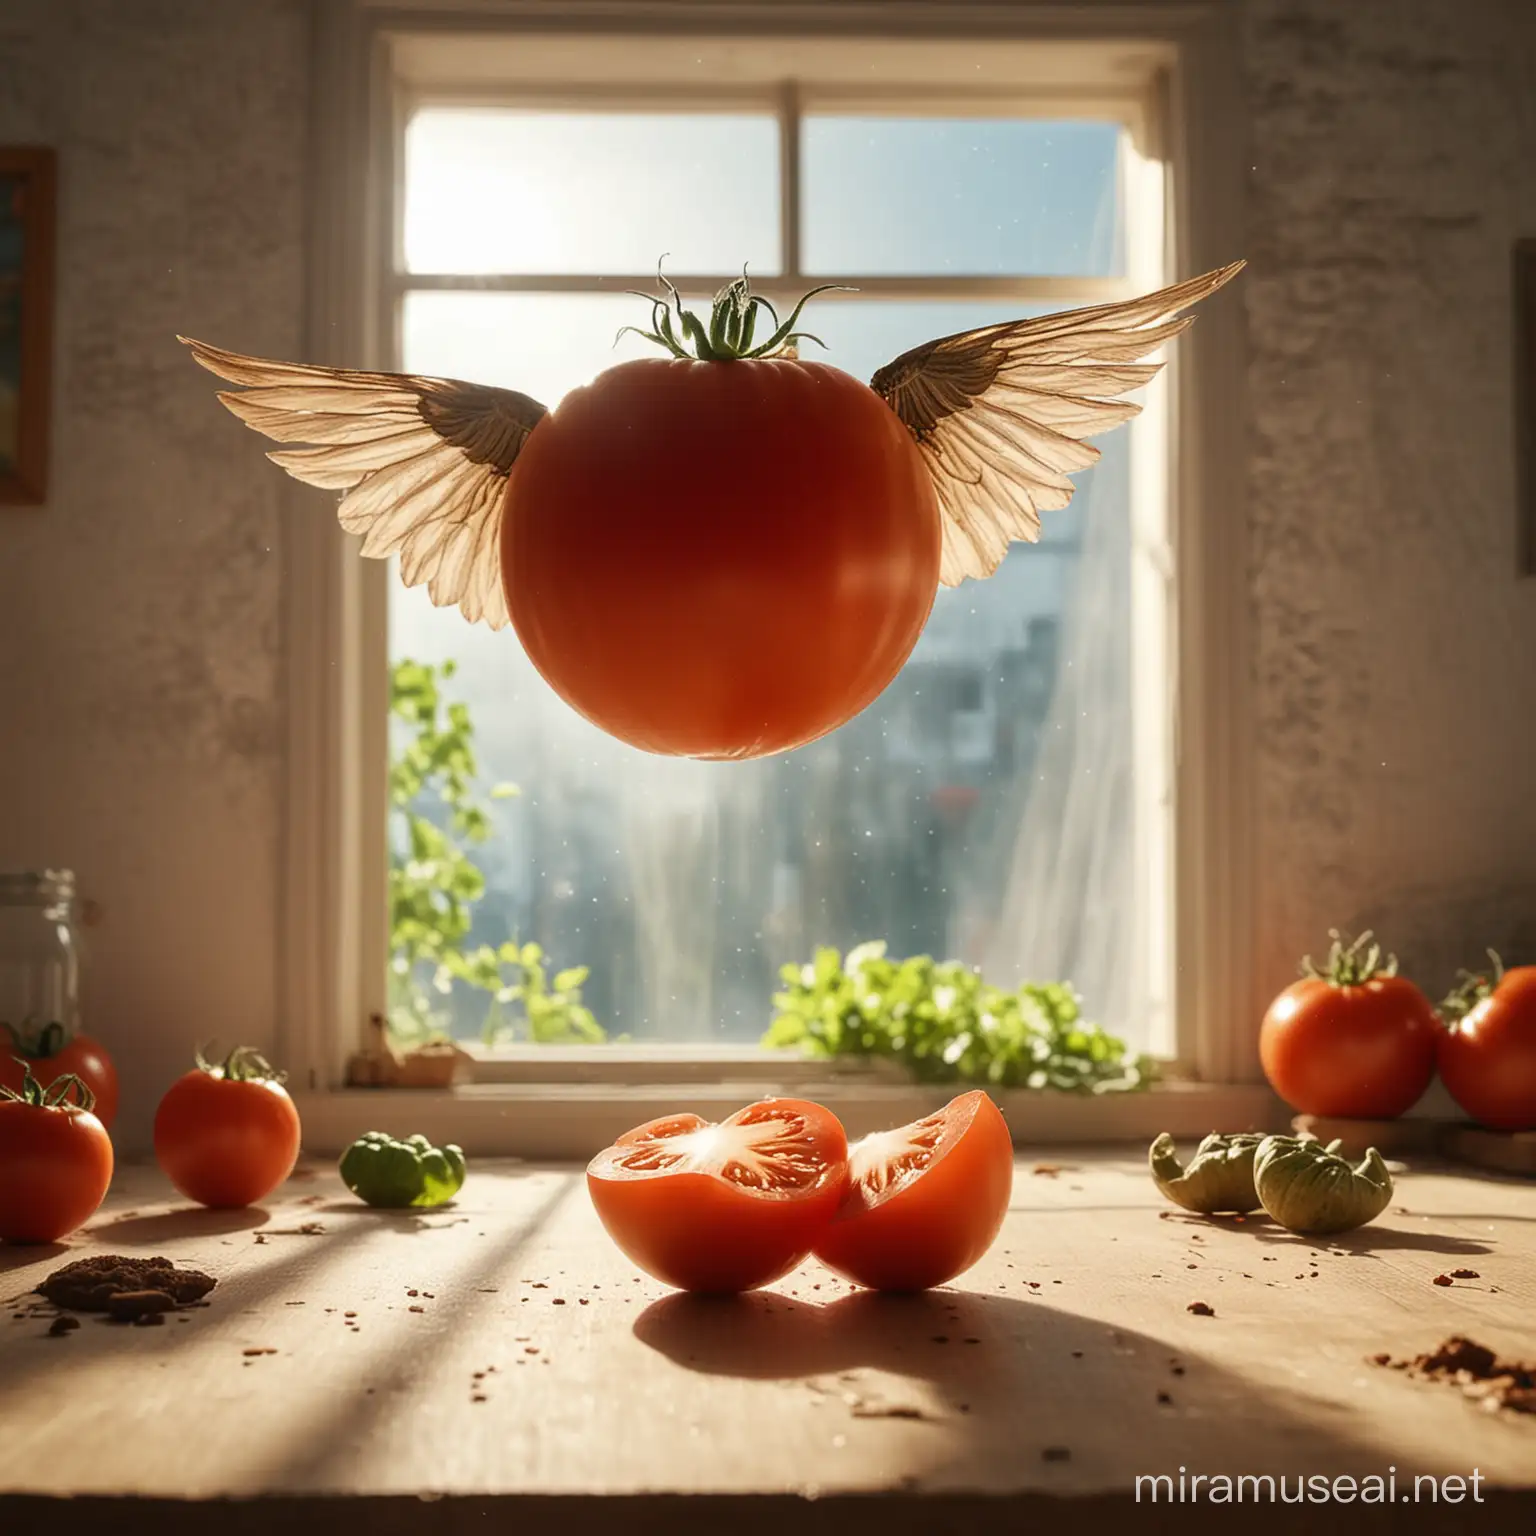 Giant Tomato with Enormous Wings Soaring Through Space